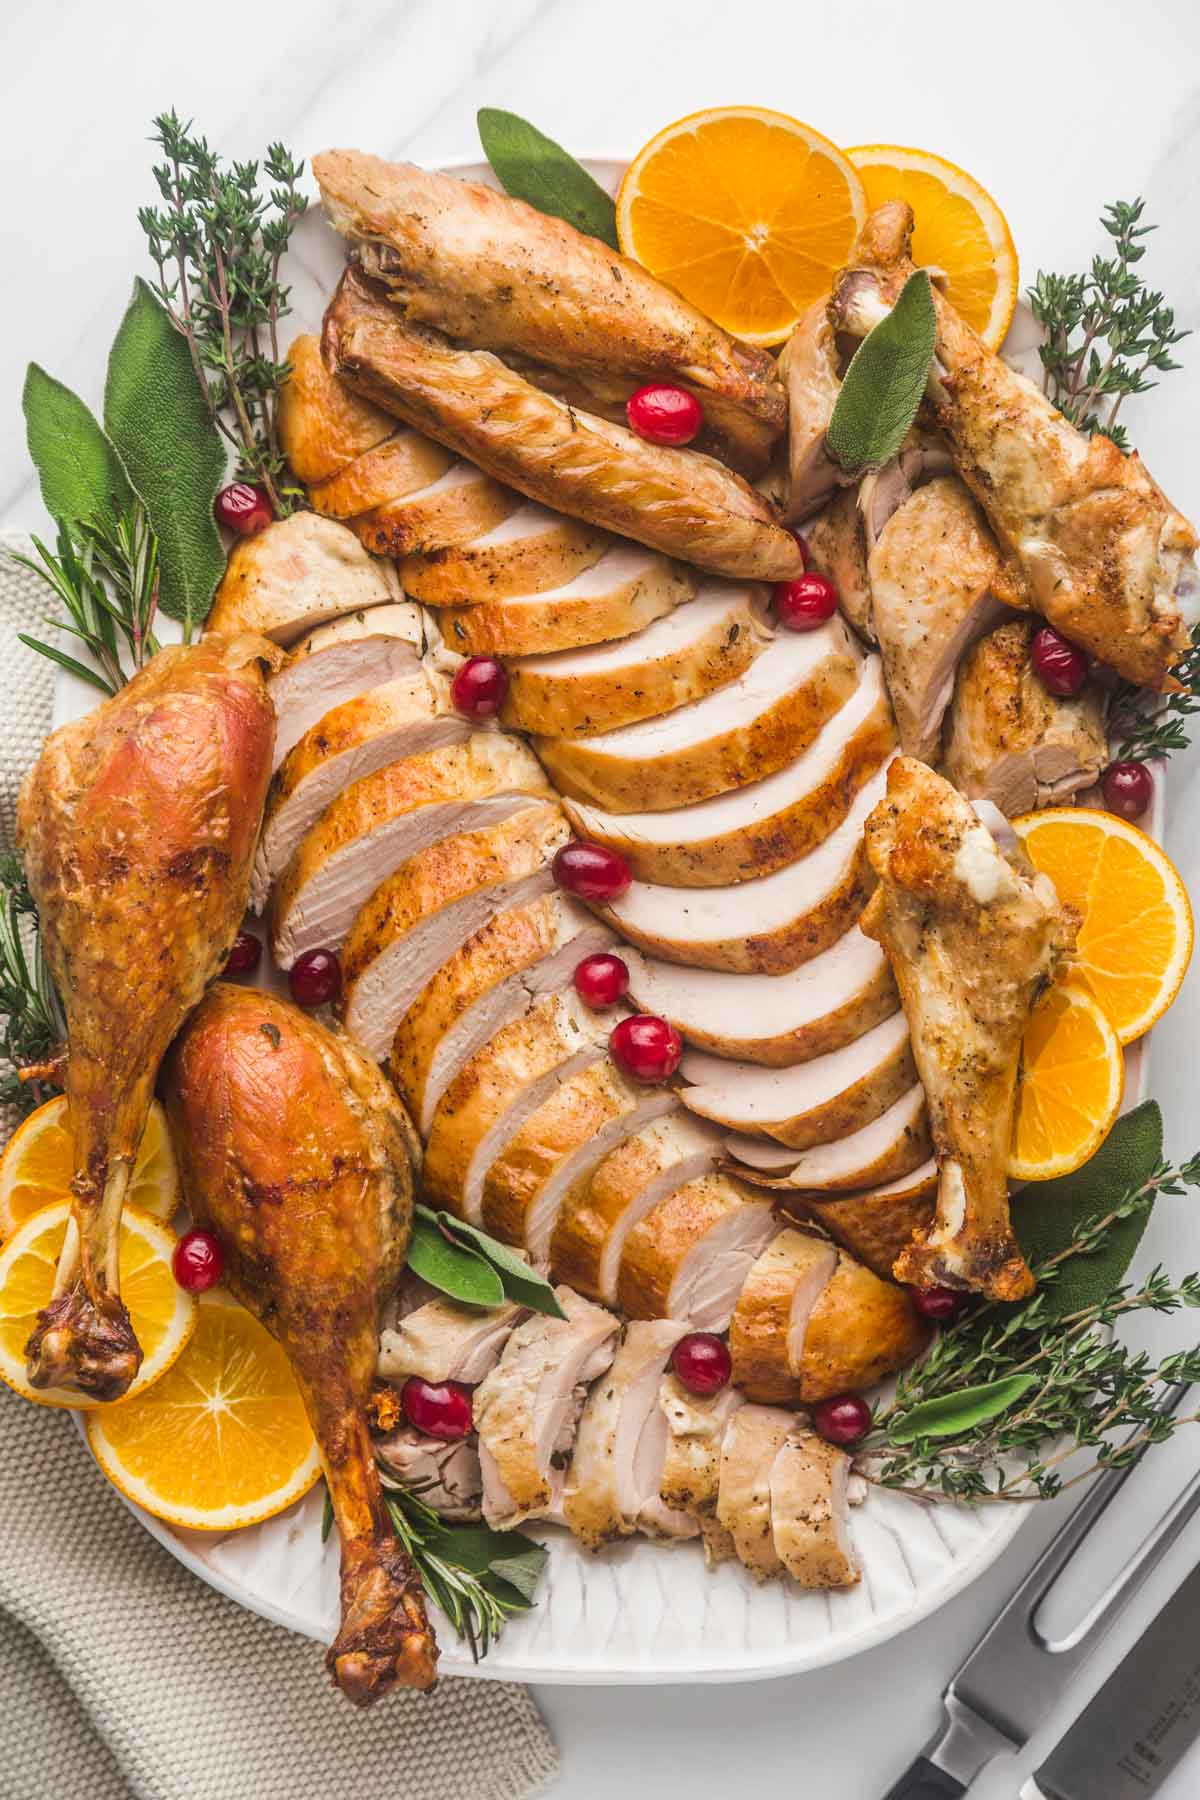 Carved and sliced turkey pieces served on a large white platter, with fresh herbs, orange slices, and fresh cranberries.